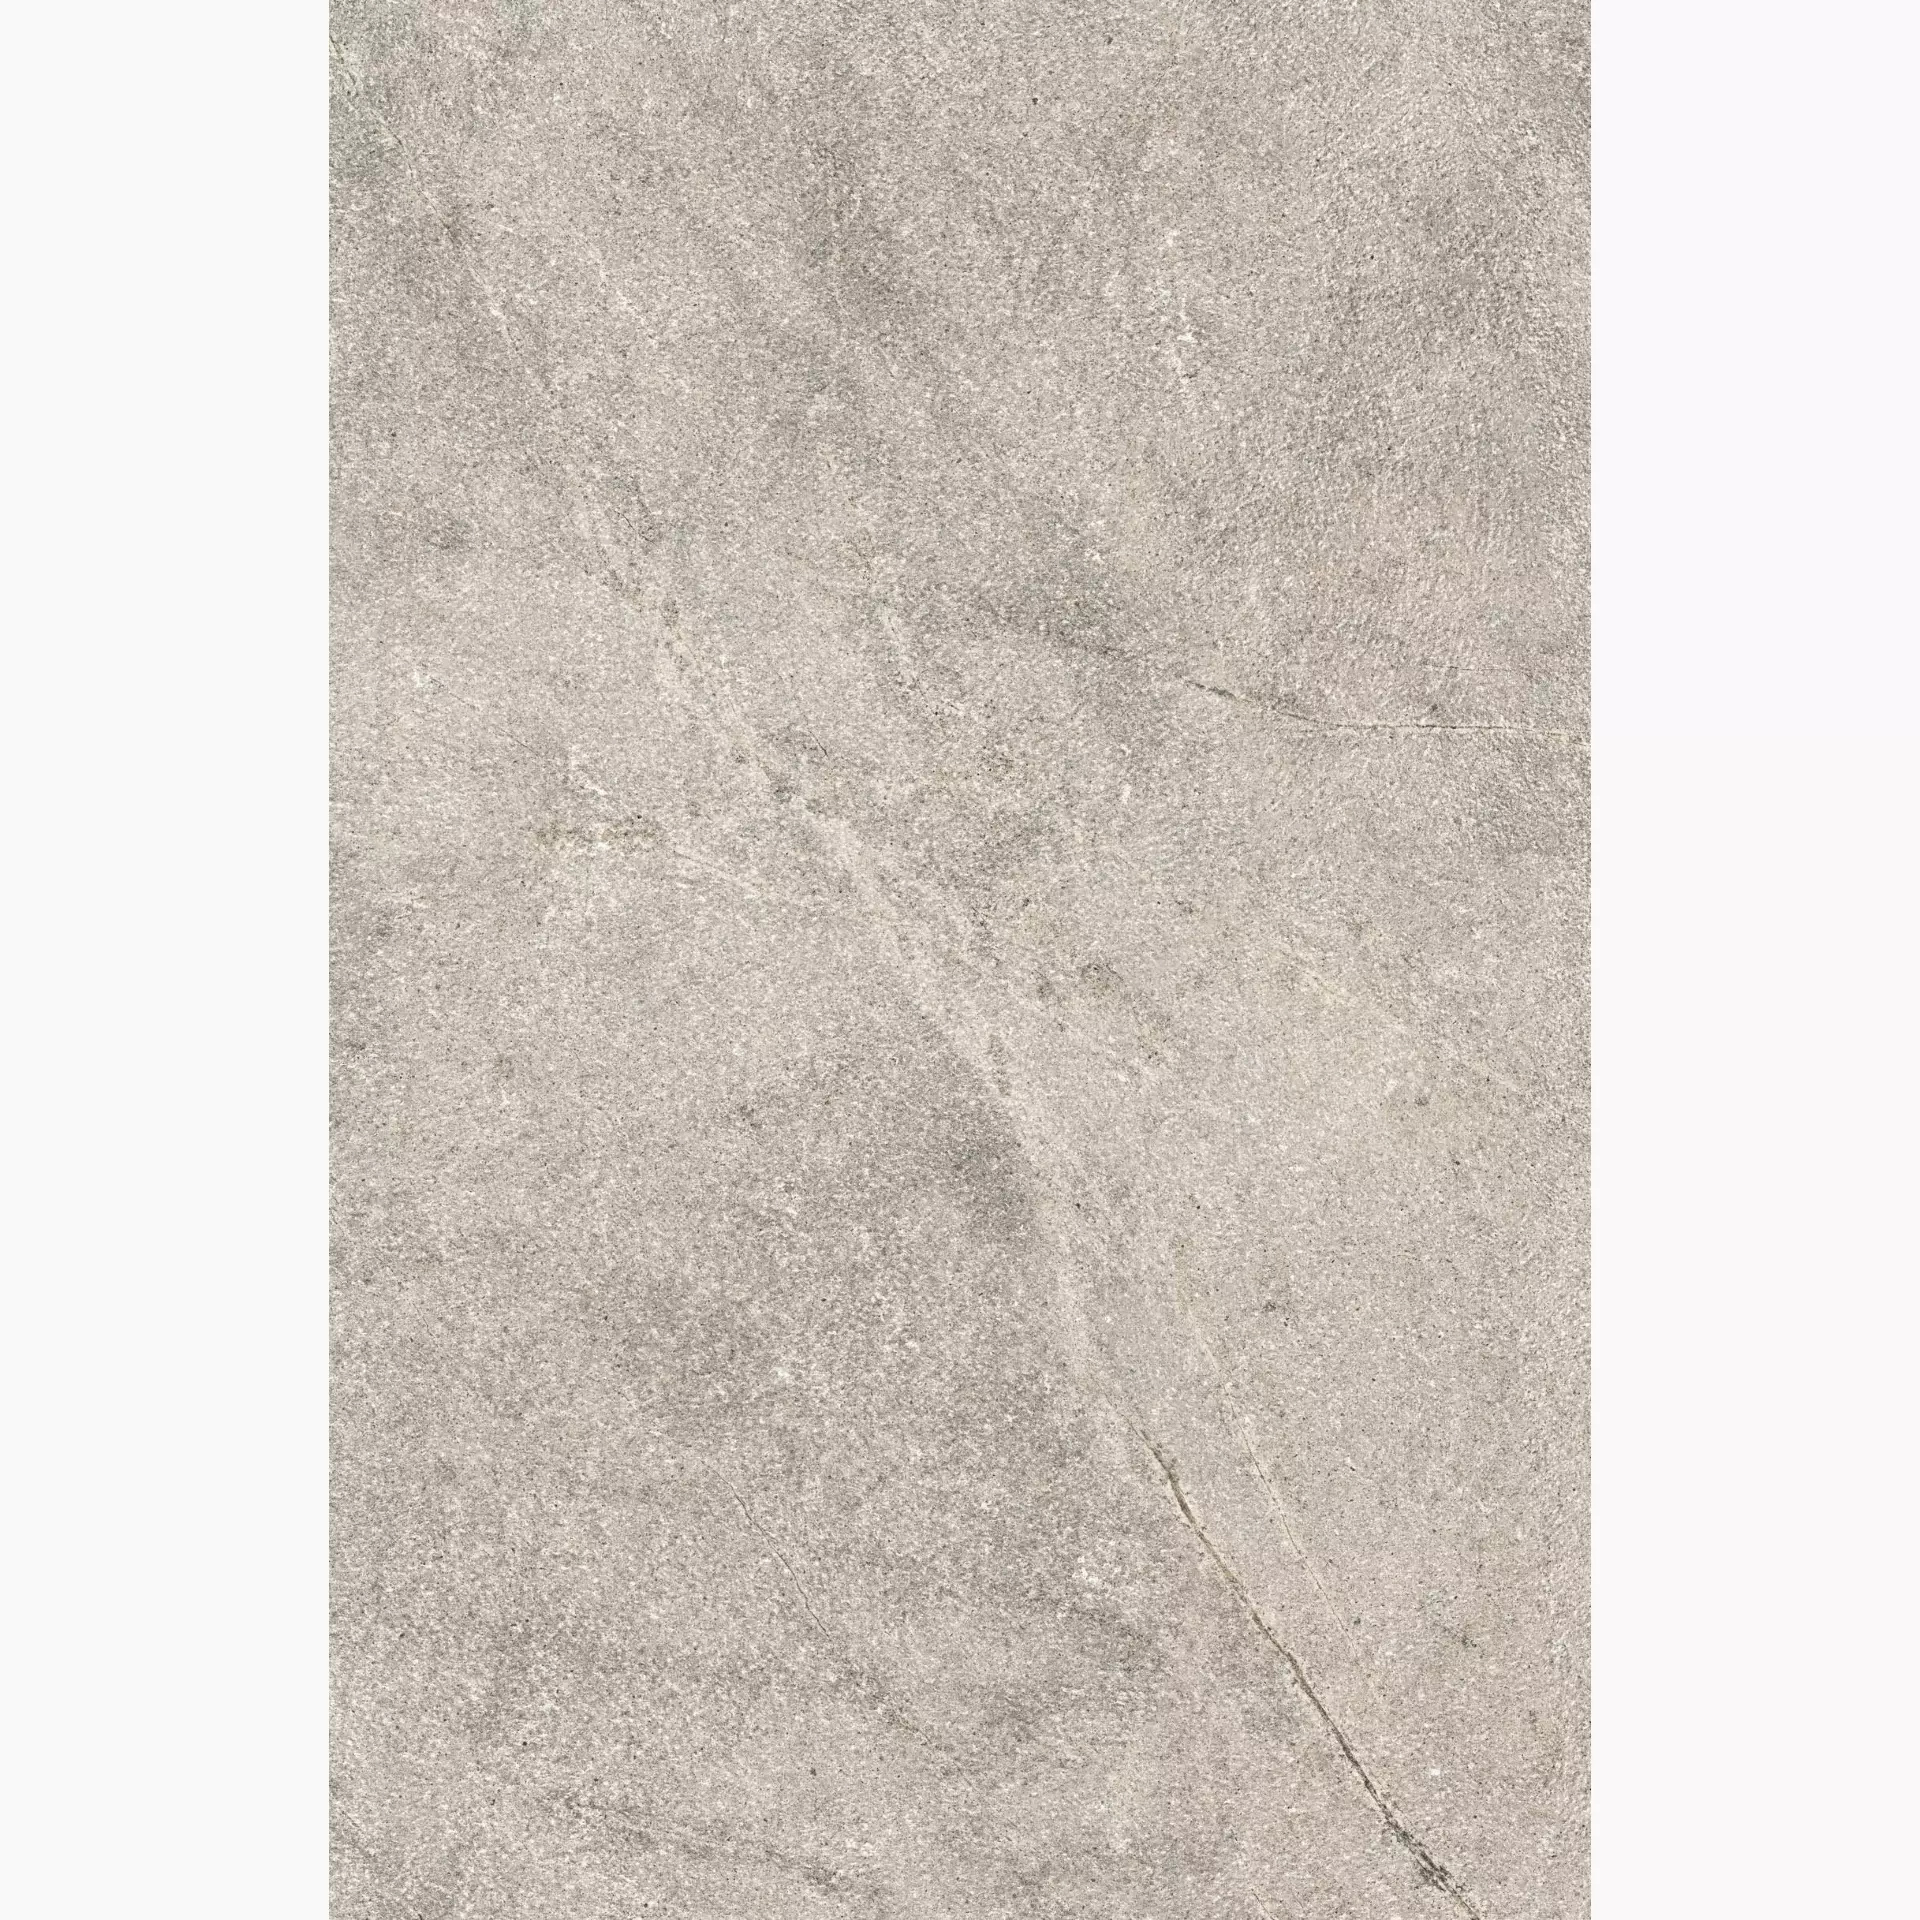 ABK Out.20 Atlantis Sand Hammered Outdoor PF60007176 60x90cm rectified 20mm